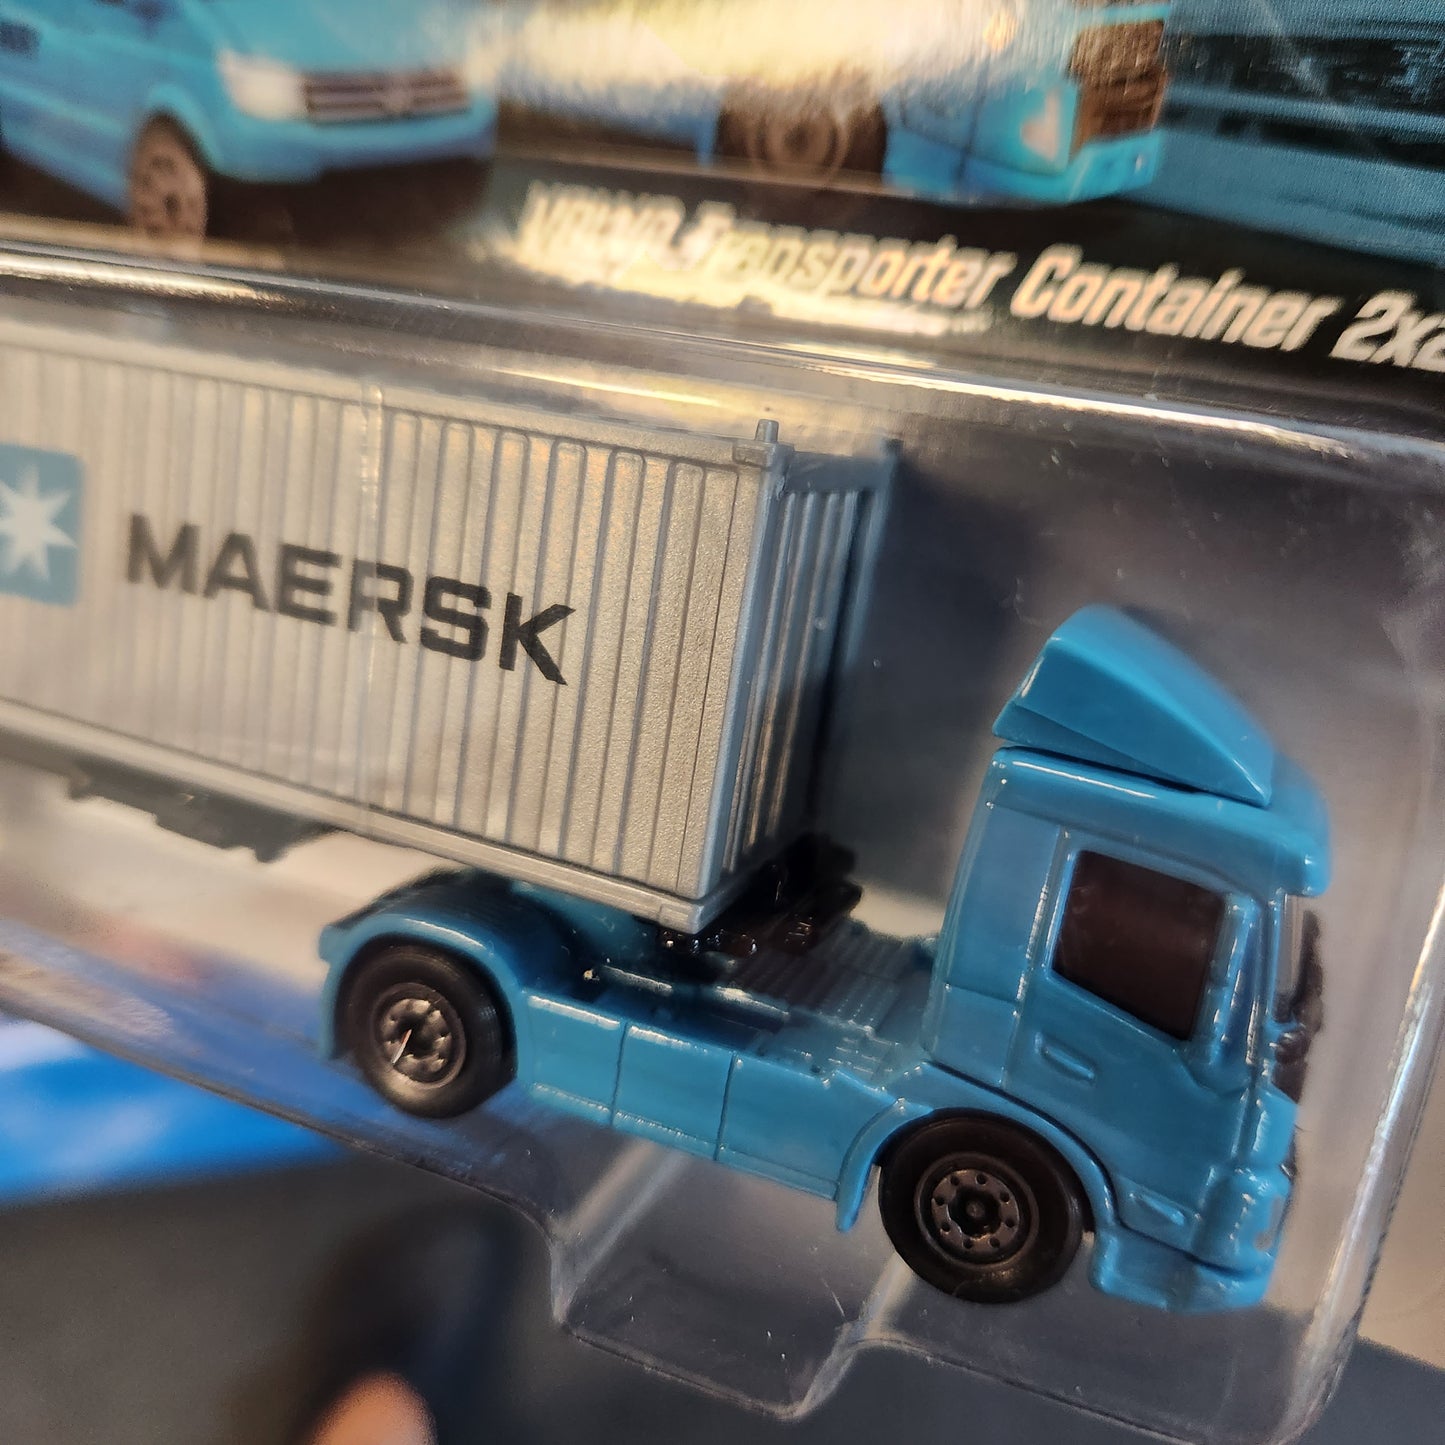 Majorette - Maersk Logistic - Volvo Transporter + 2 x 20ft Container (New for 2023)